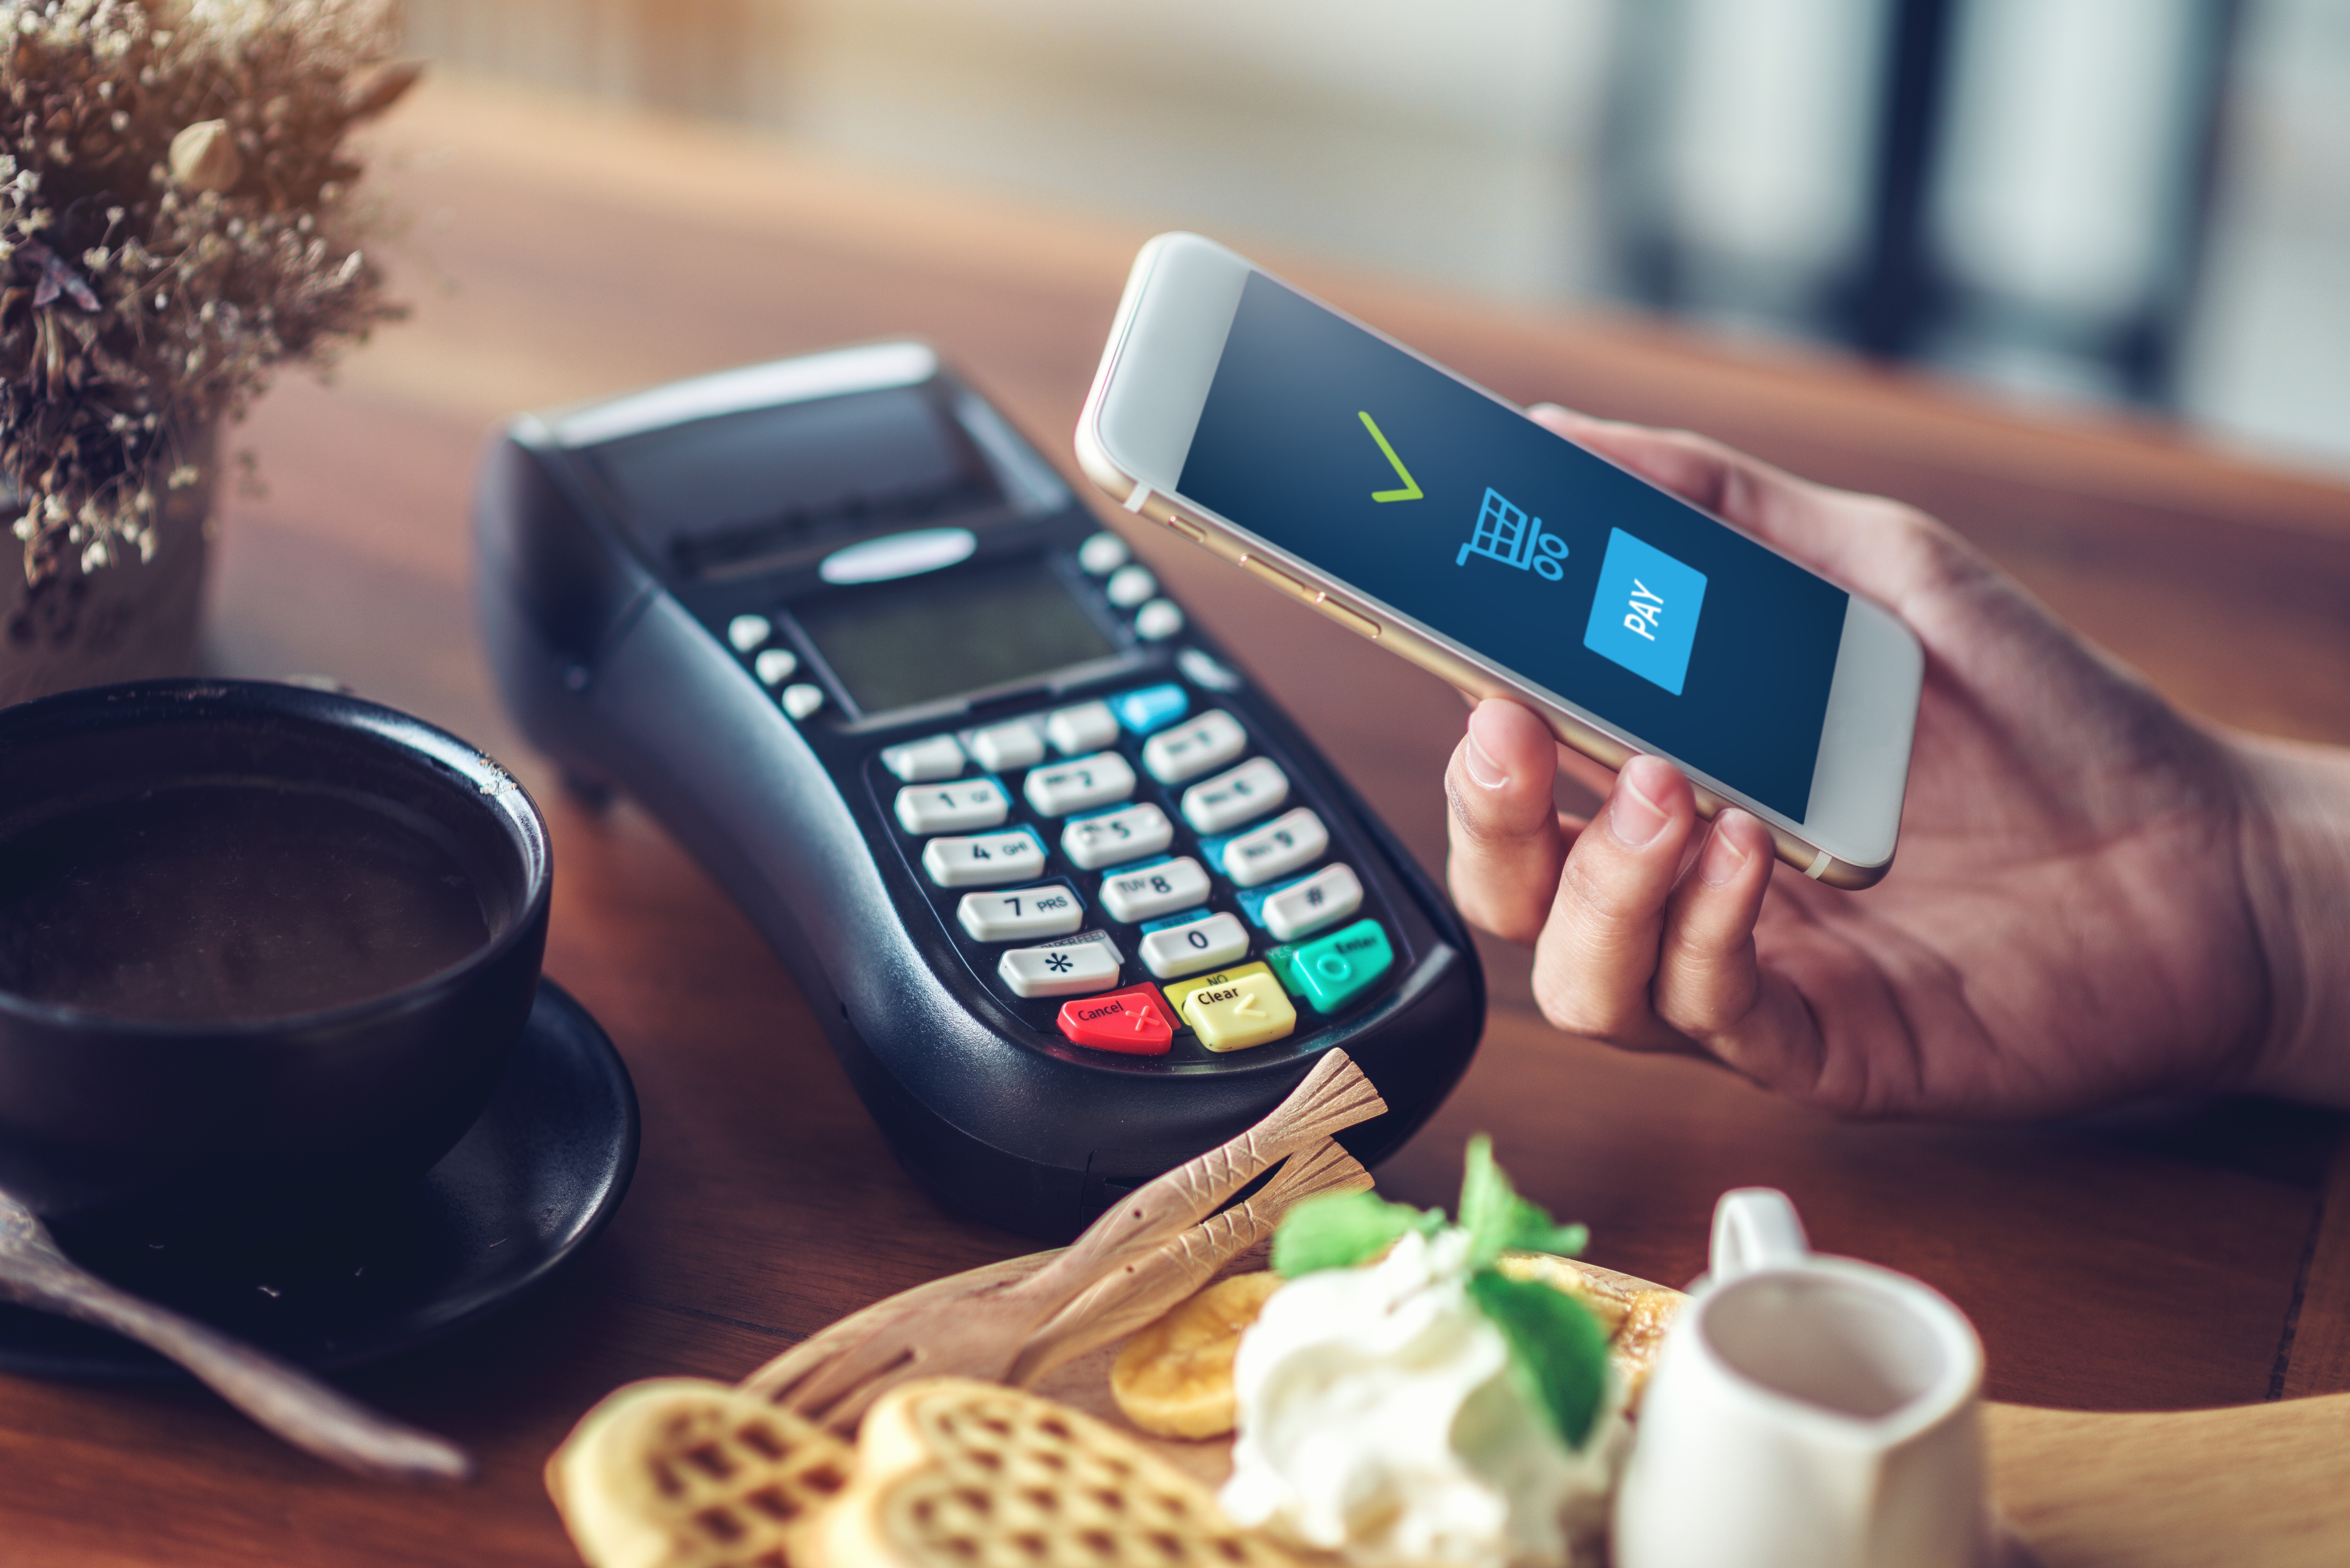 The Covid-19 pandemic, which has caused major disruptions around the world, has accelerated the demand for digital payment services. Photo: Shutterstock